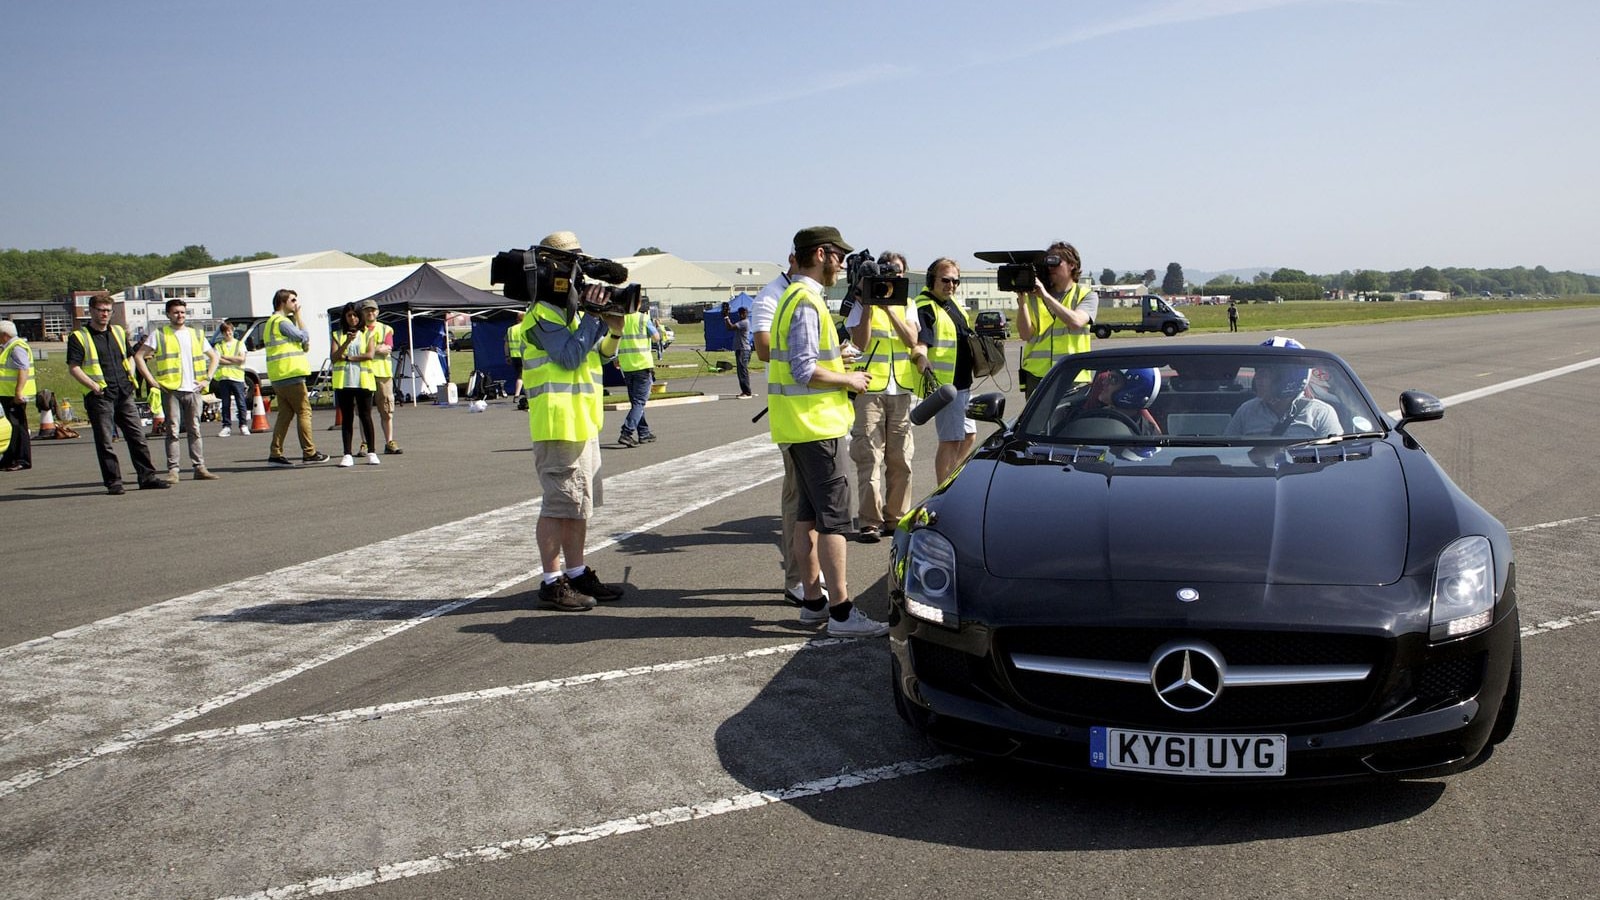 Former F1 ace David Coulthard and Golfer Jake Shepherd in SLS AMG world record attempt